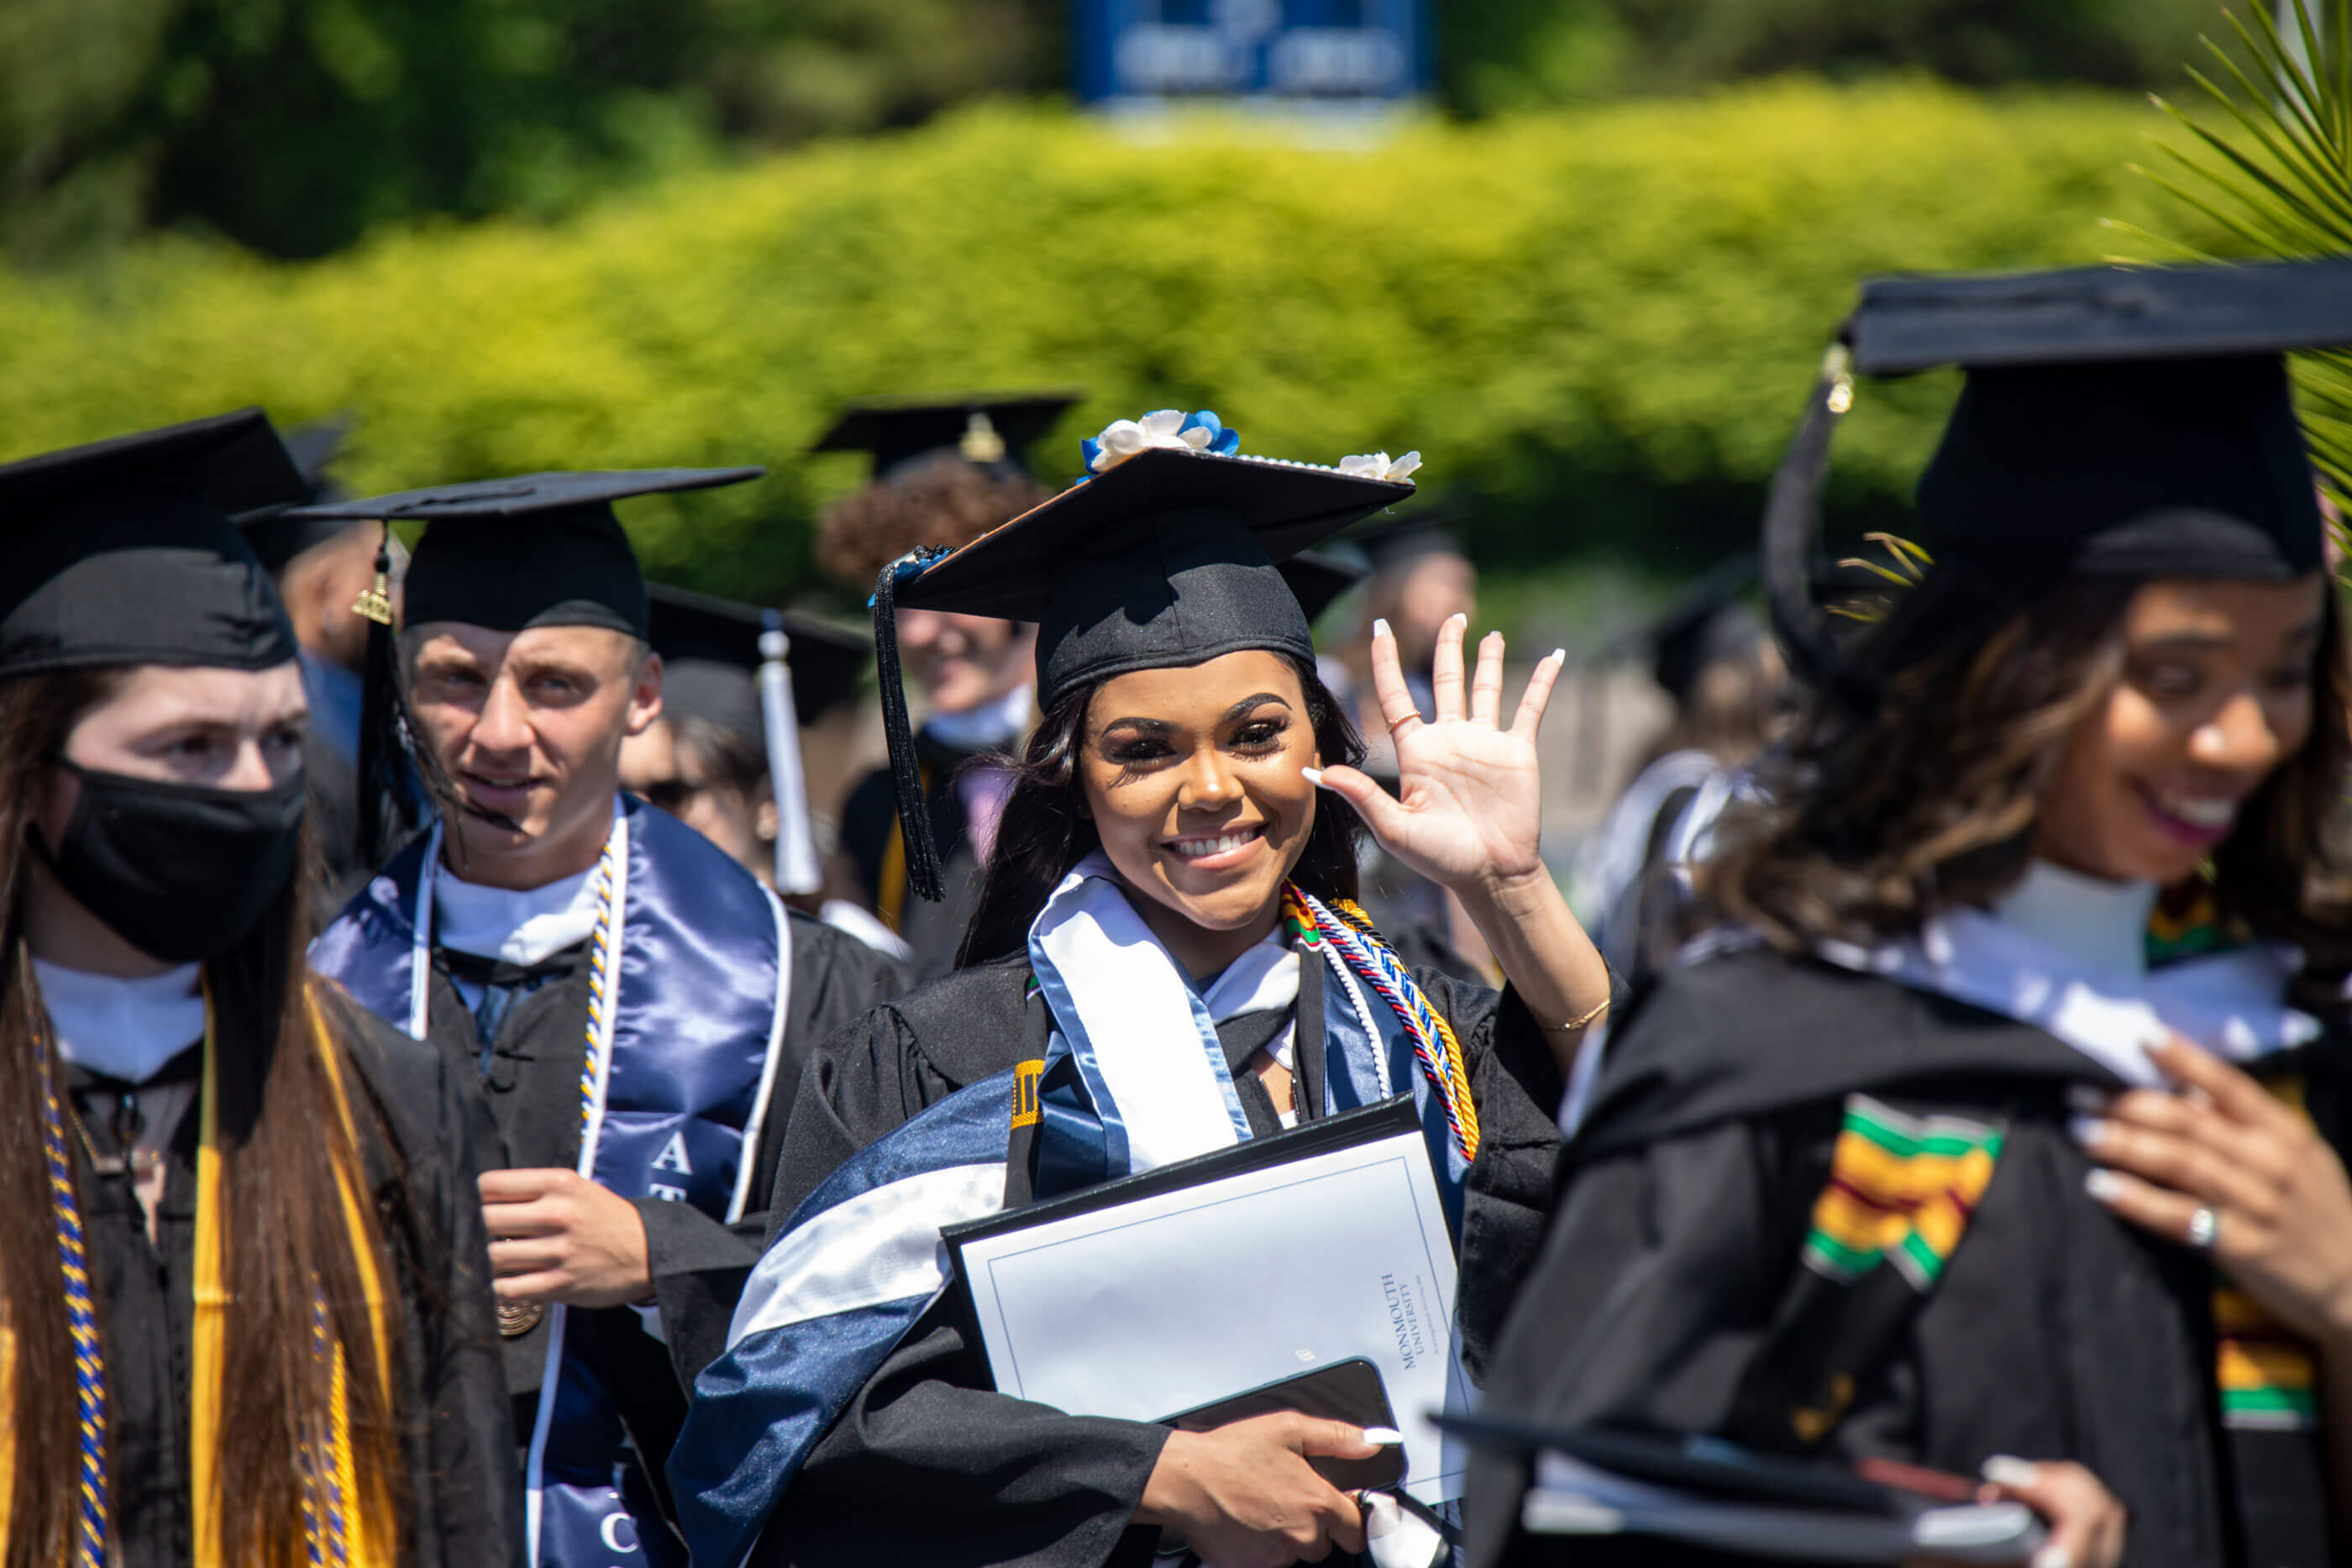 A woman holding a diploma and her phone is wearing a commencement gown and cap, she waves at the camera and is surrounded by other smiling graduates